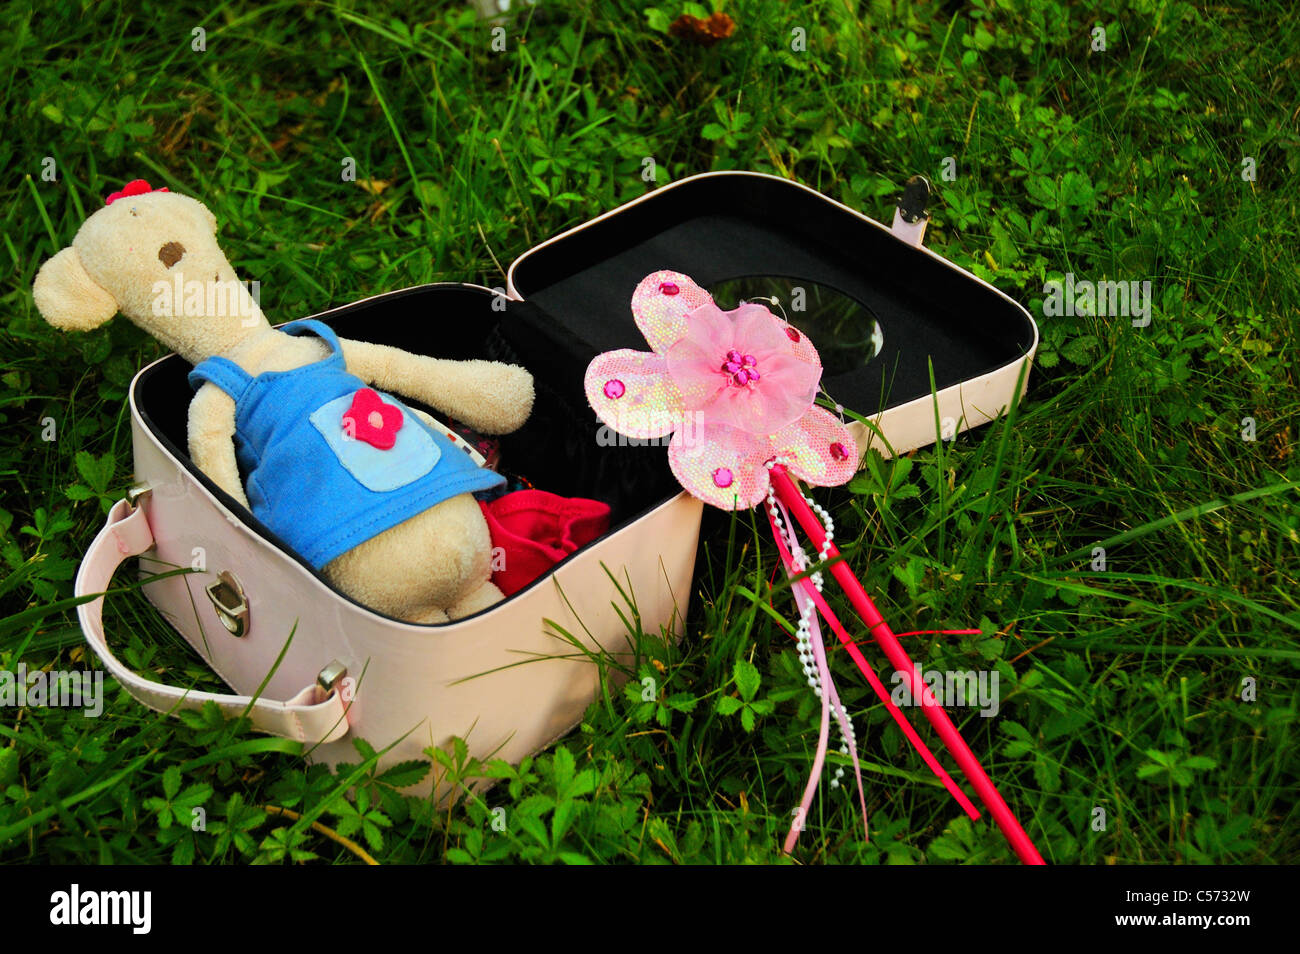 Suitcase with teddy bear and wand Stock Photo